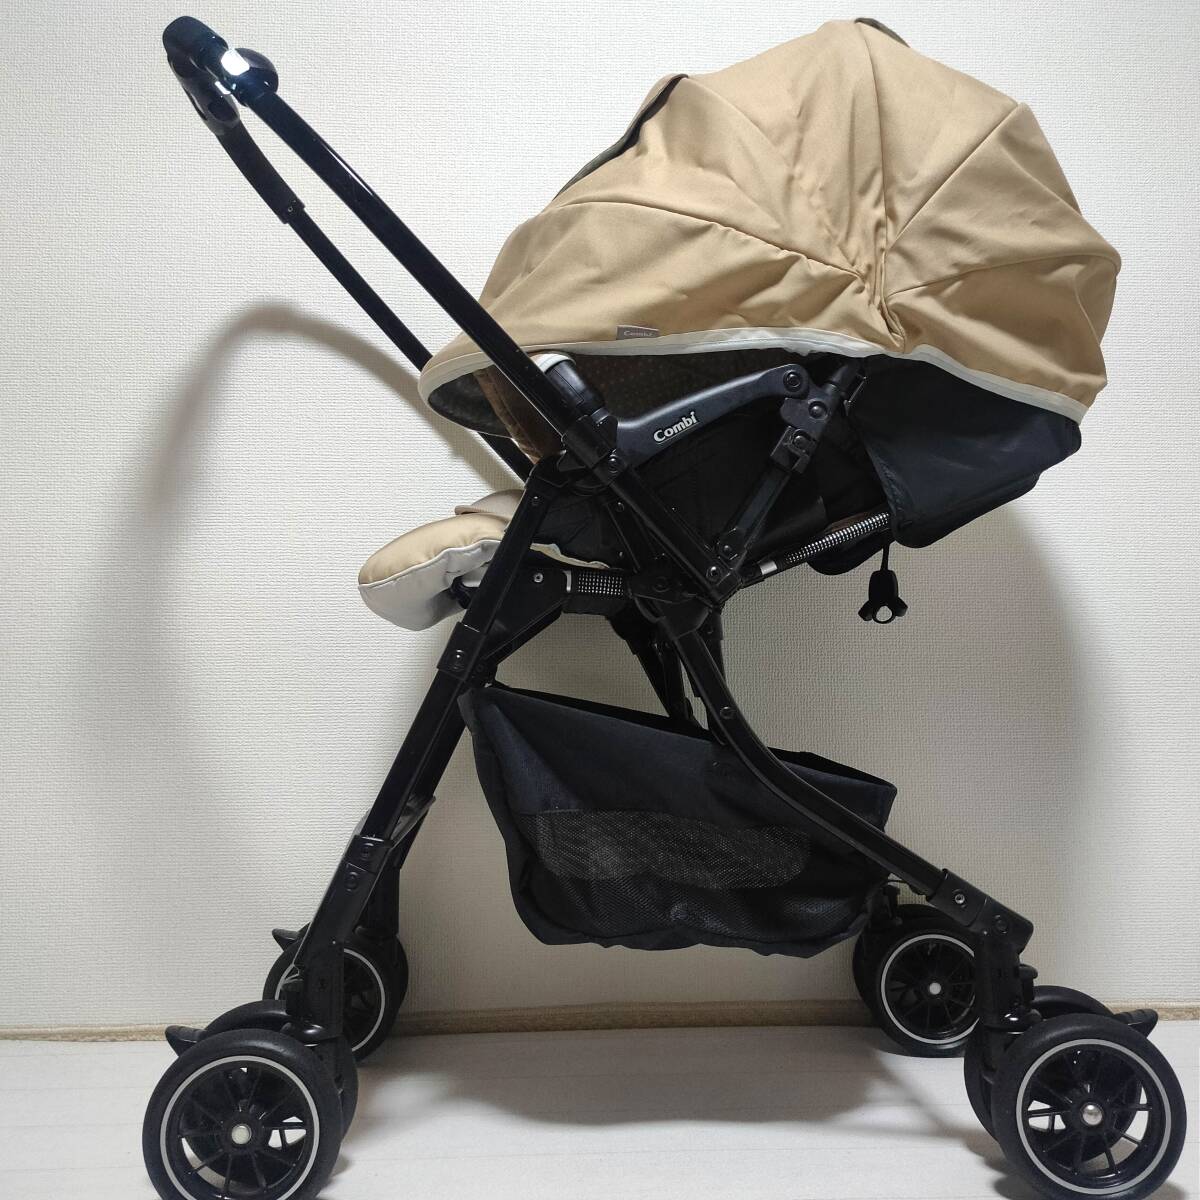 [ including carriage ] combination extra attaching beautiful me tea karu auto 4 Cath eg shock stroller both against surface type high seat light weight cleaning settled 